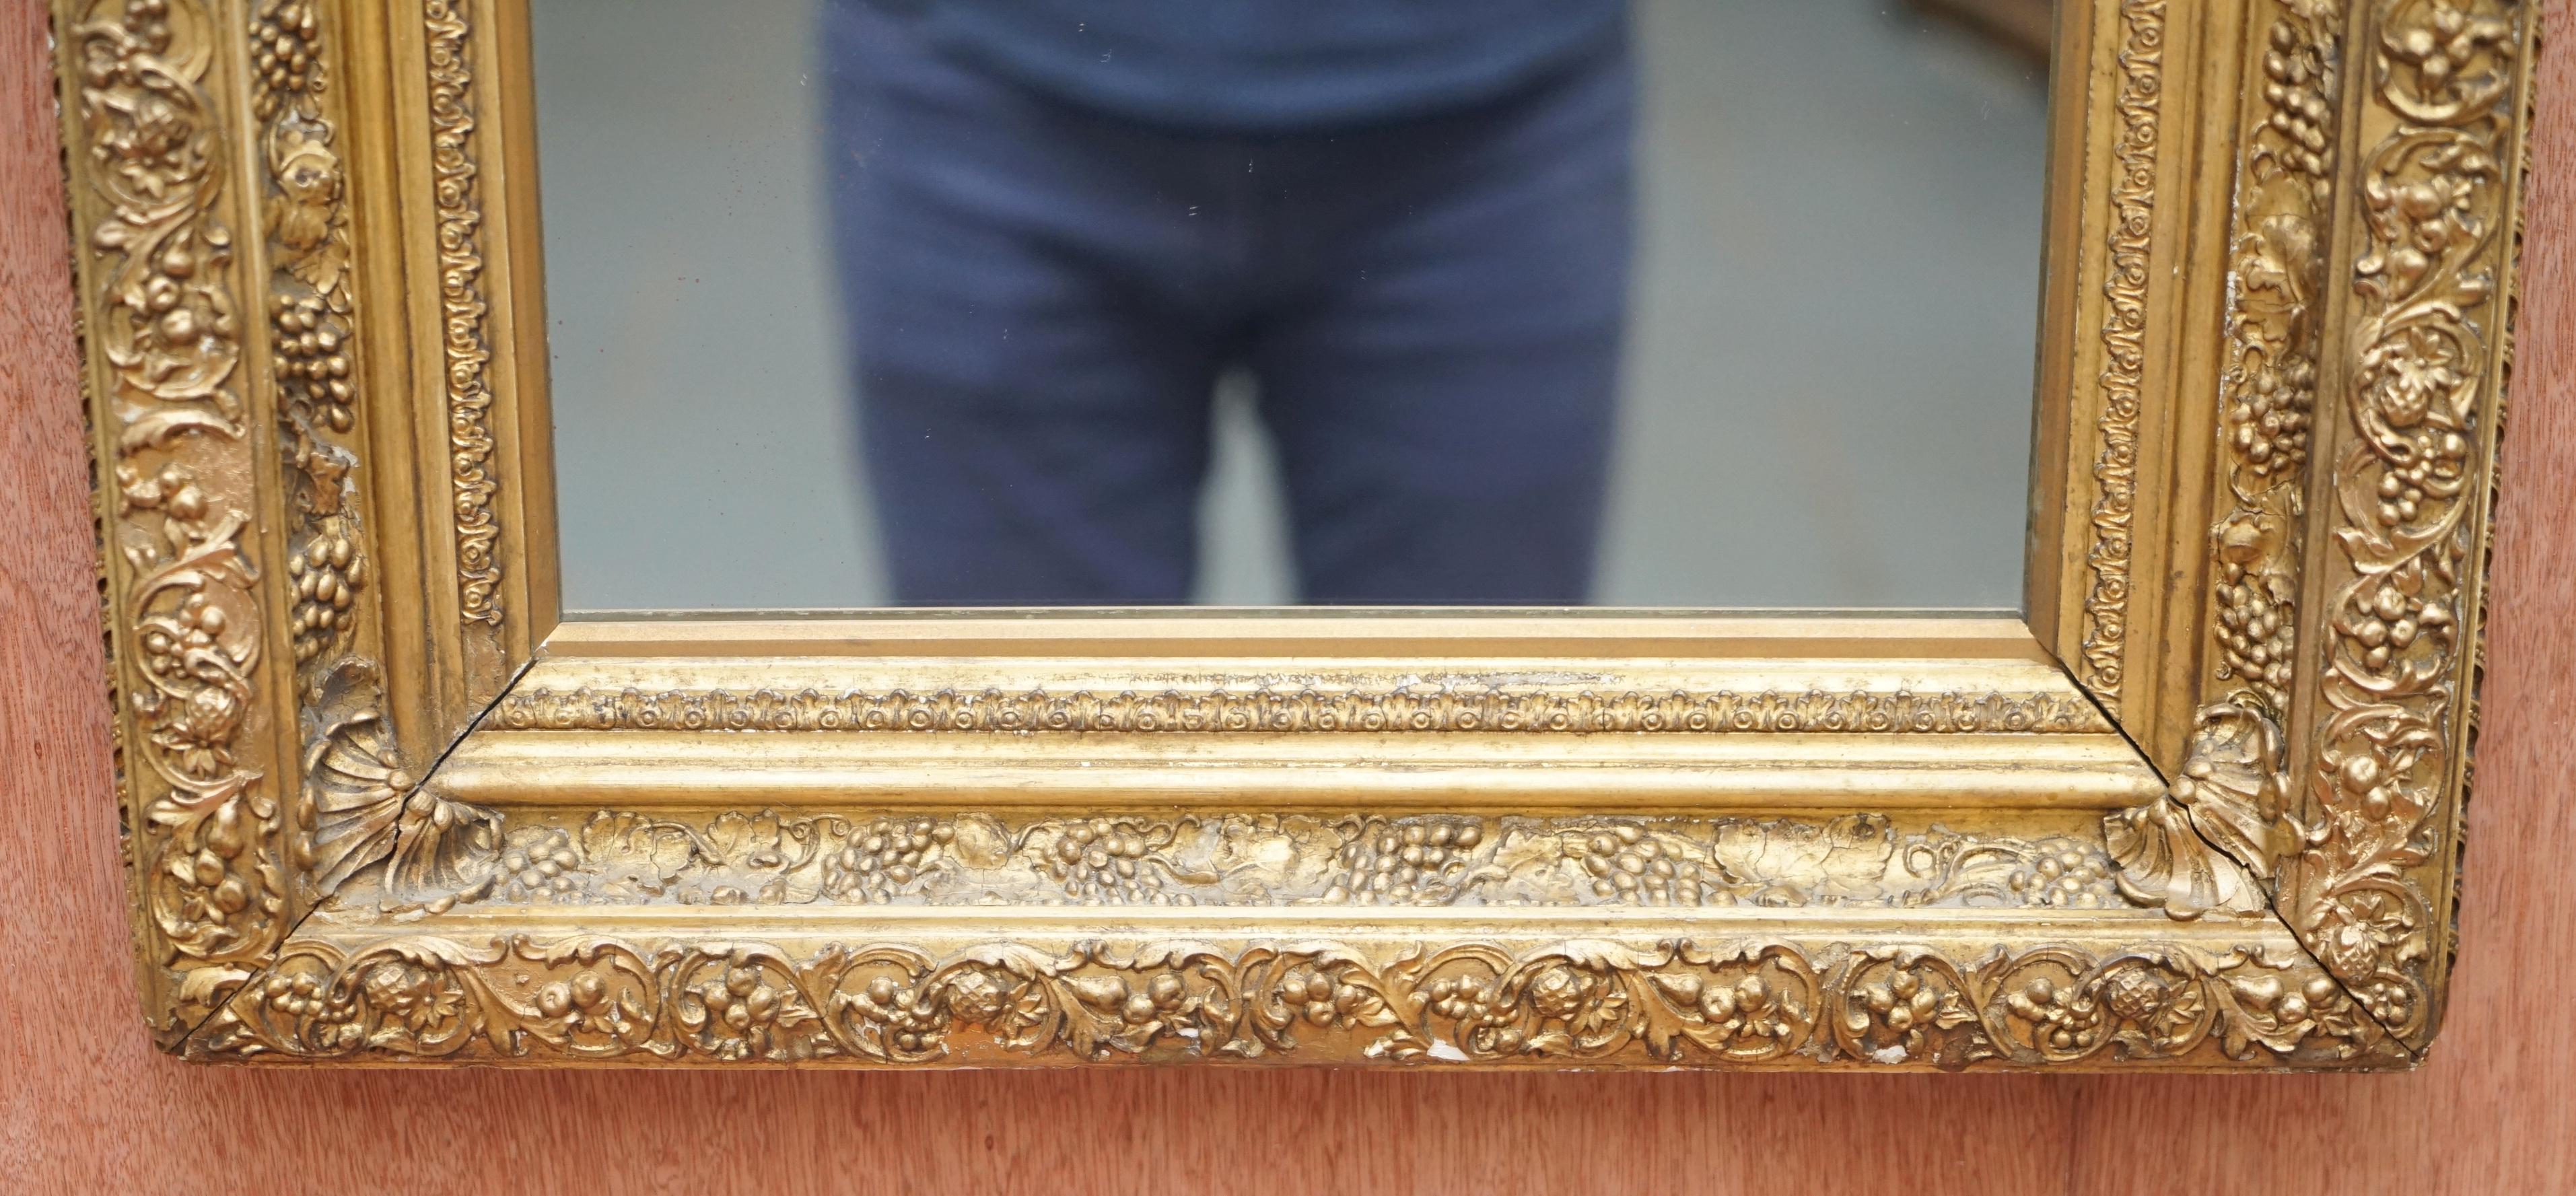 We are delighted to offer for sale this absolutely sublime English Victorian heavily carved wall mirror, circa 1880

This mirror is a tour de force of carving, the frame has three levels which in turn has different styles of carving depending on